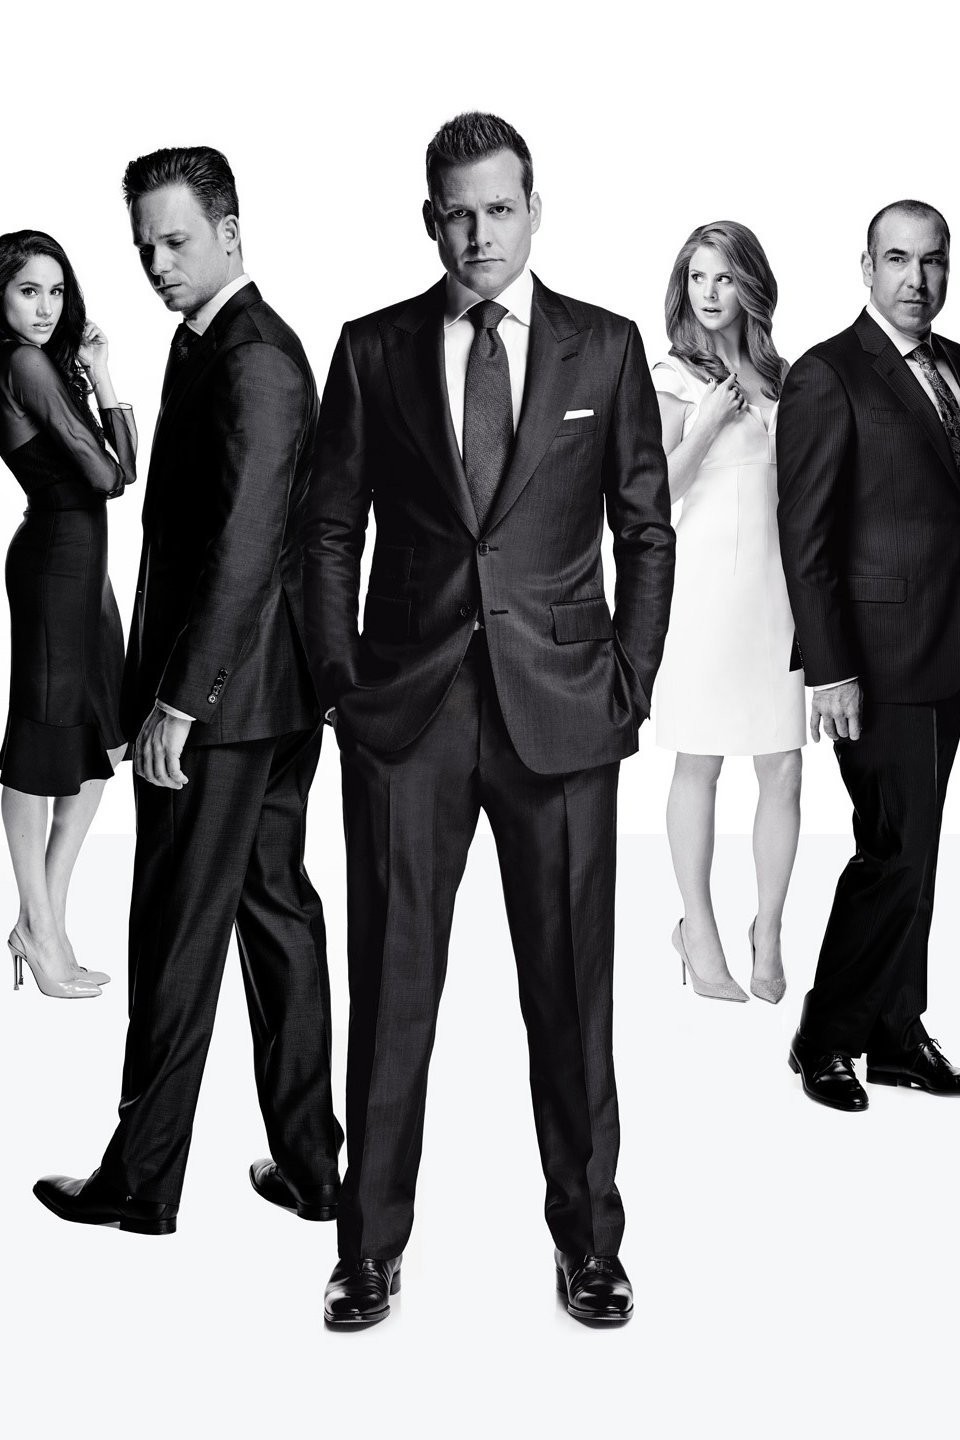 Is 'Suits' a good show to rewatch? - Quora